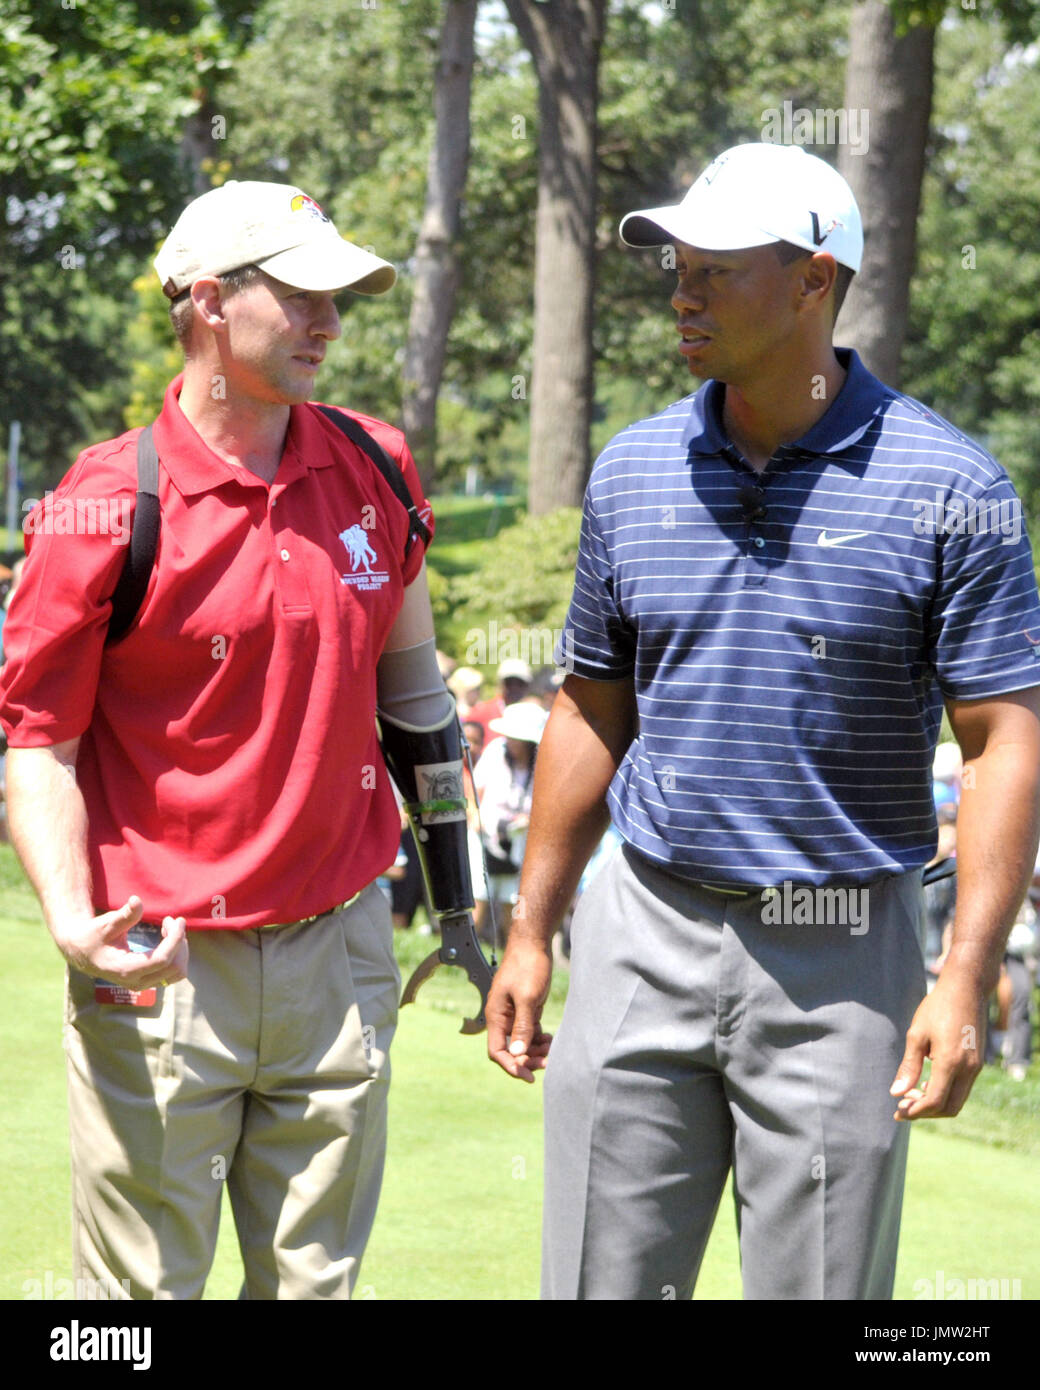 Bethesda, MD - July 1, 2009 -- Tiger Woods, right, shares some thoughts with United States Army Major Ken Dwyer, left, following their ceremonial tee shot to open the AT&T National Hosted by Tiger Woods at Congressional Country Club in Bethesda, Maryland on Wednesday, July 1, 2009. Credit: Ron Sachs / CNP Stock Photo